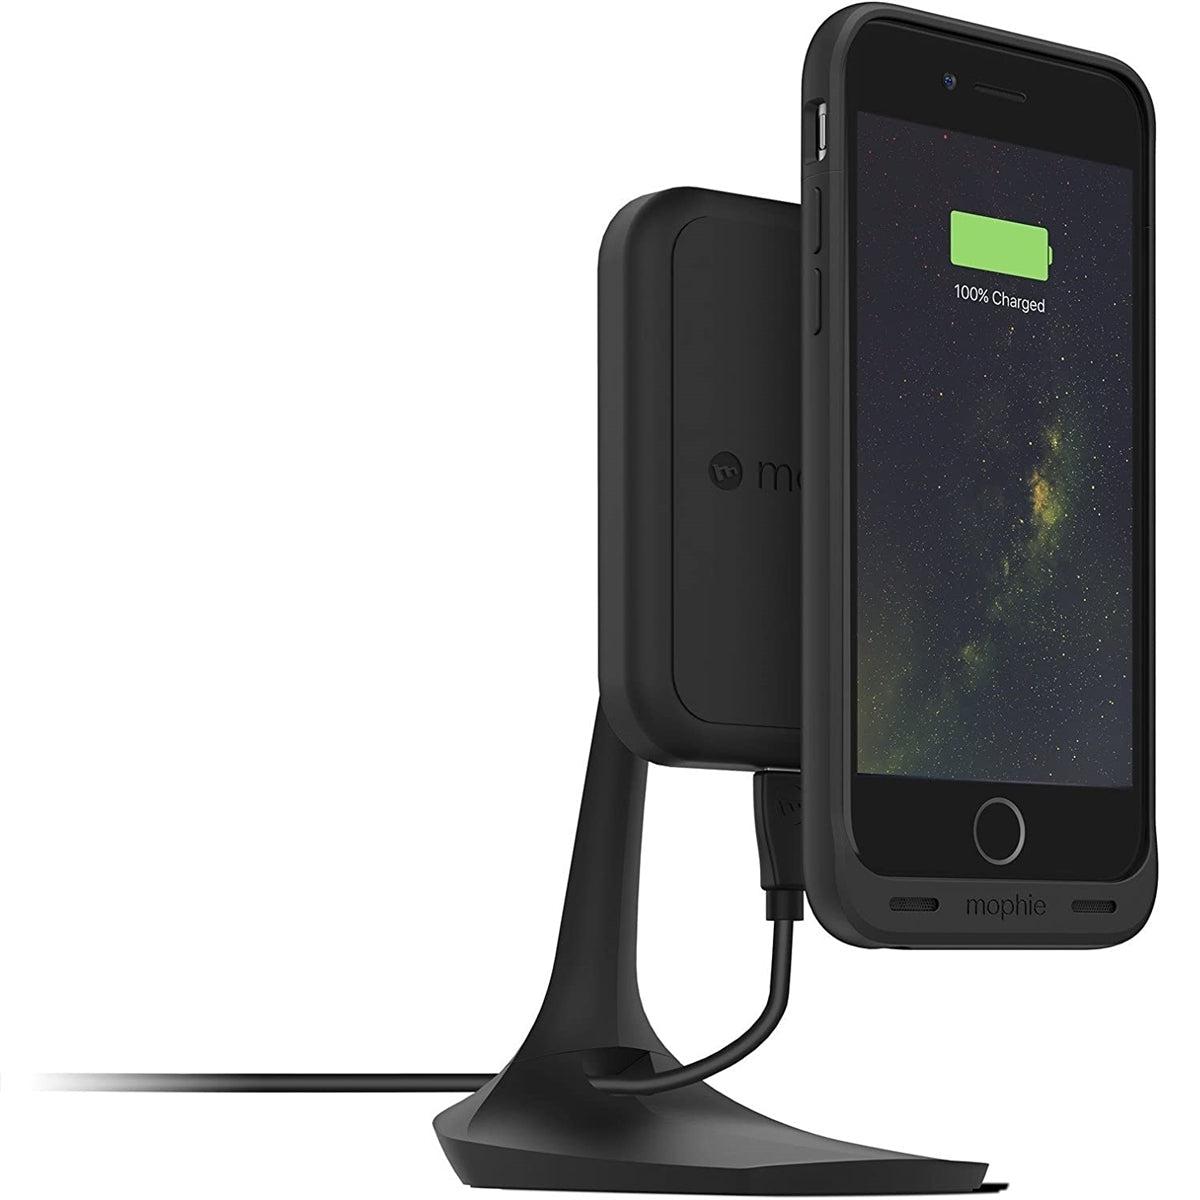 Mophie Wireless B-3454 Force Desktop Dock 10W Charger Black (In Plain White Box)-Chargers-First Help Tech